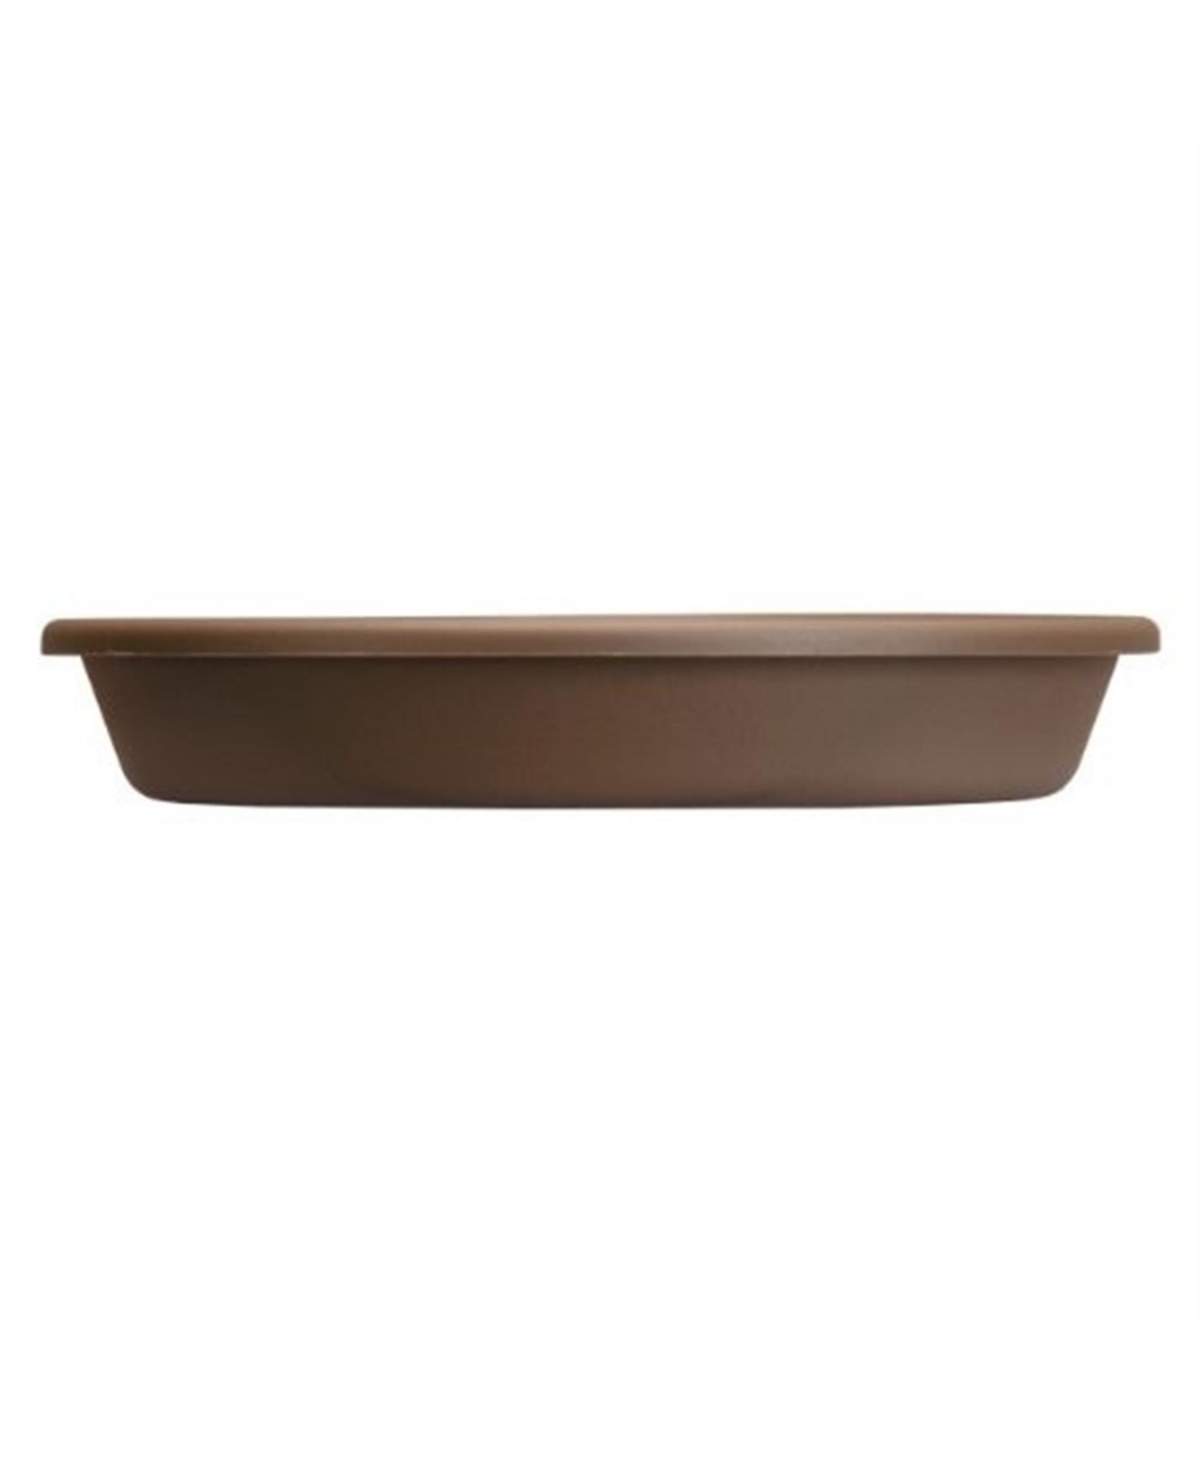 Akro Mills Classic Saucer for 8-Inch Classic Pot, Chocolate, 8.38-Inch - Brown